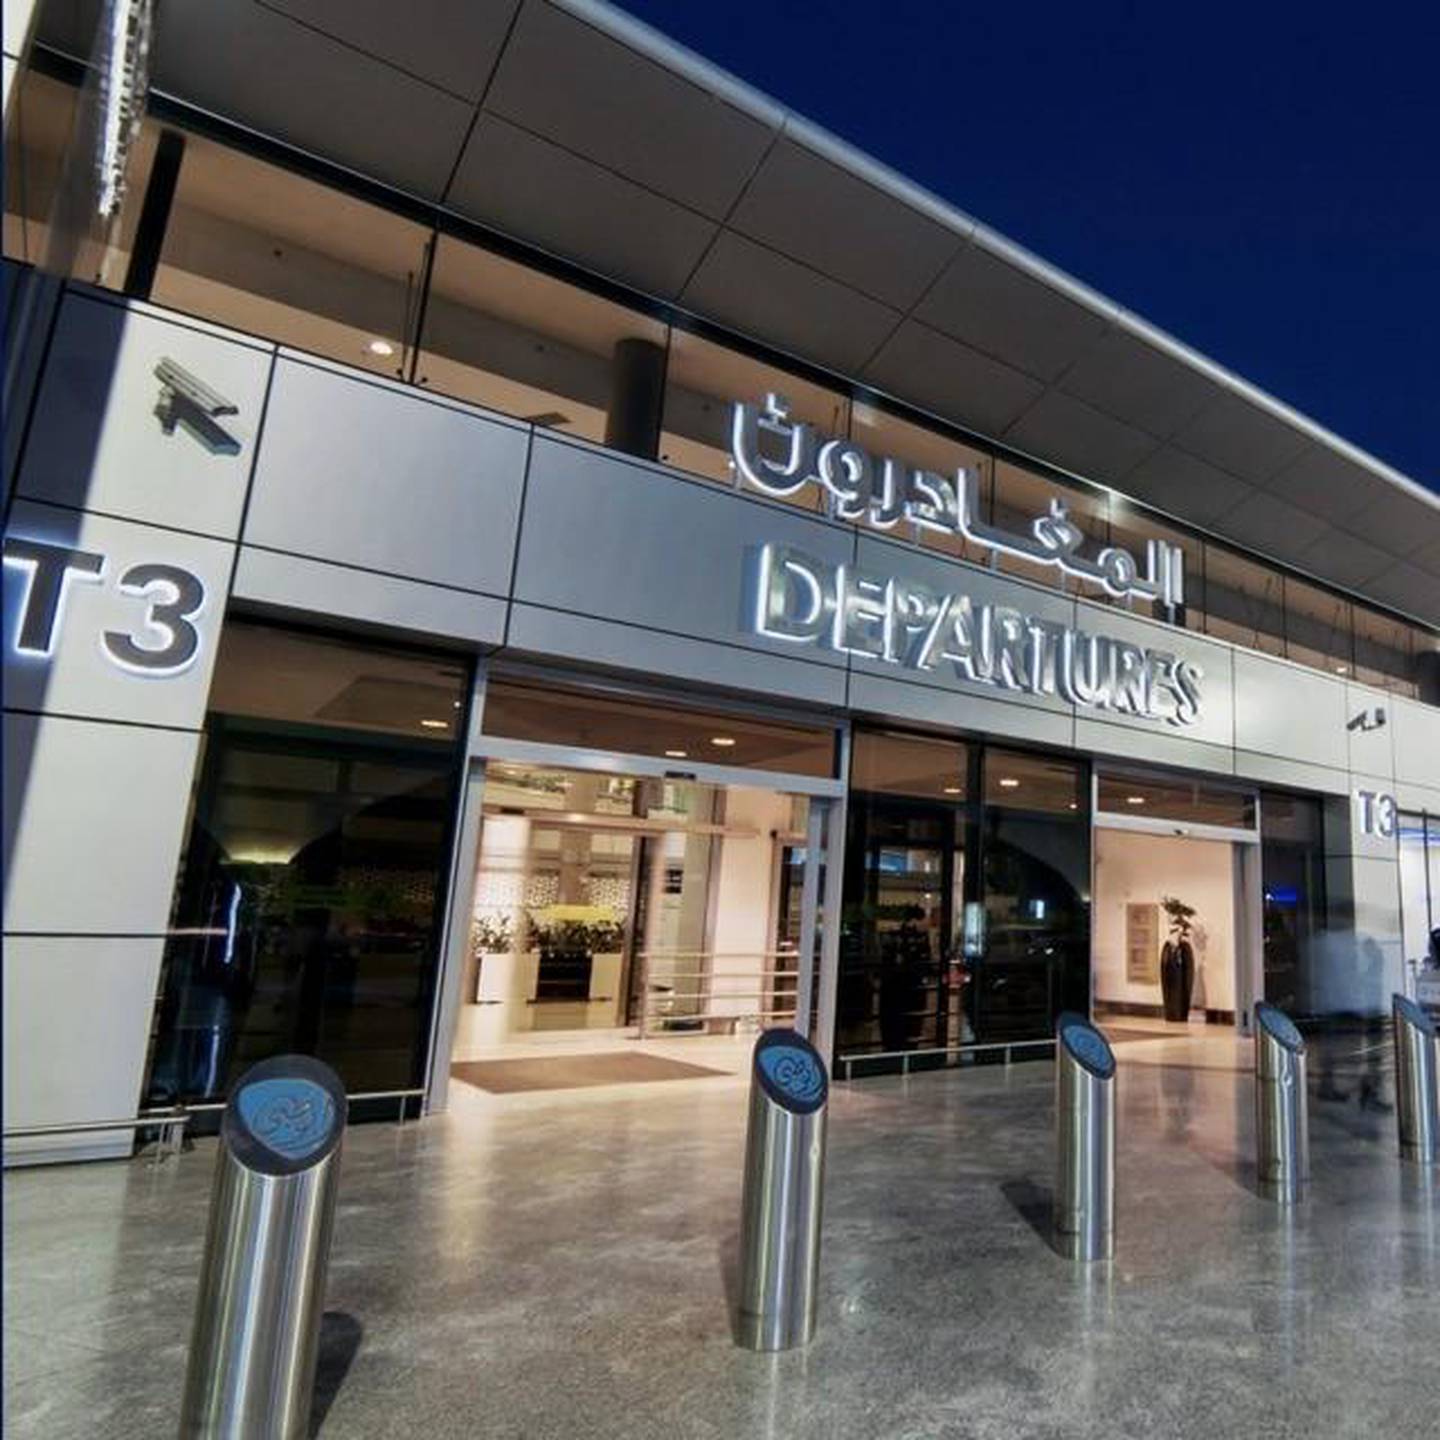 Travellers flying from Bahrain to Abu Dhabi who are fully vaccinated no longer need to quarantine when landing in the UAE or in Bahrain. Photo: Abu Dhabi Airports